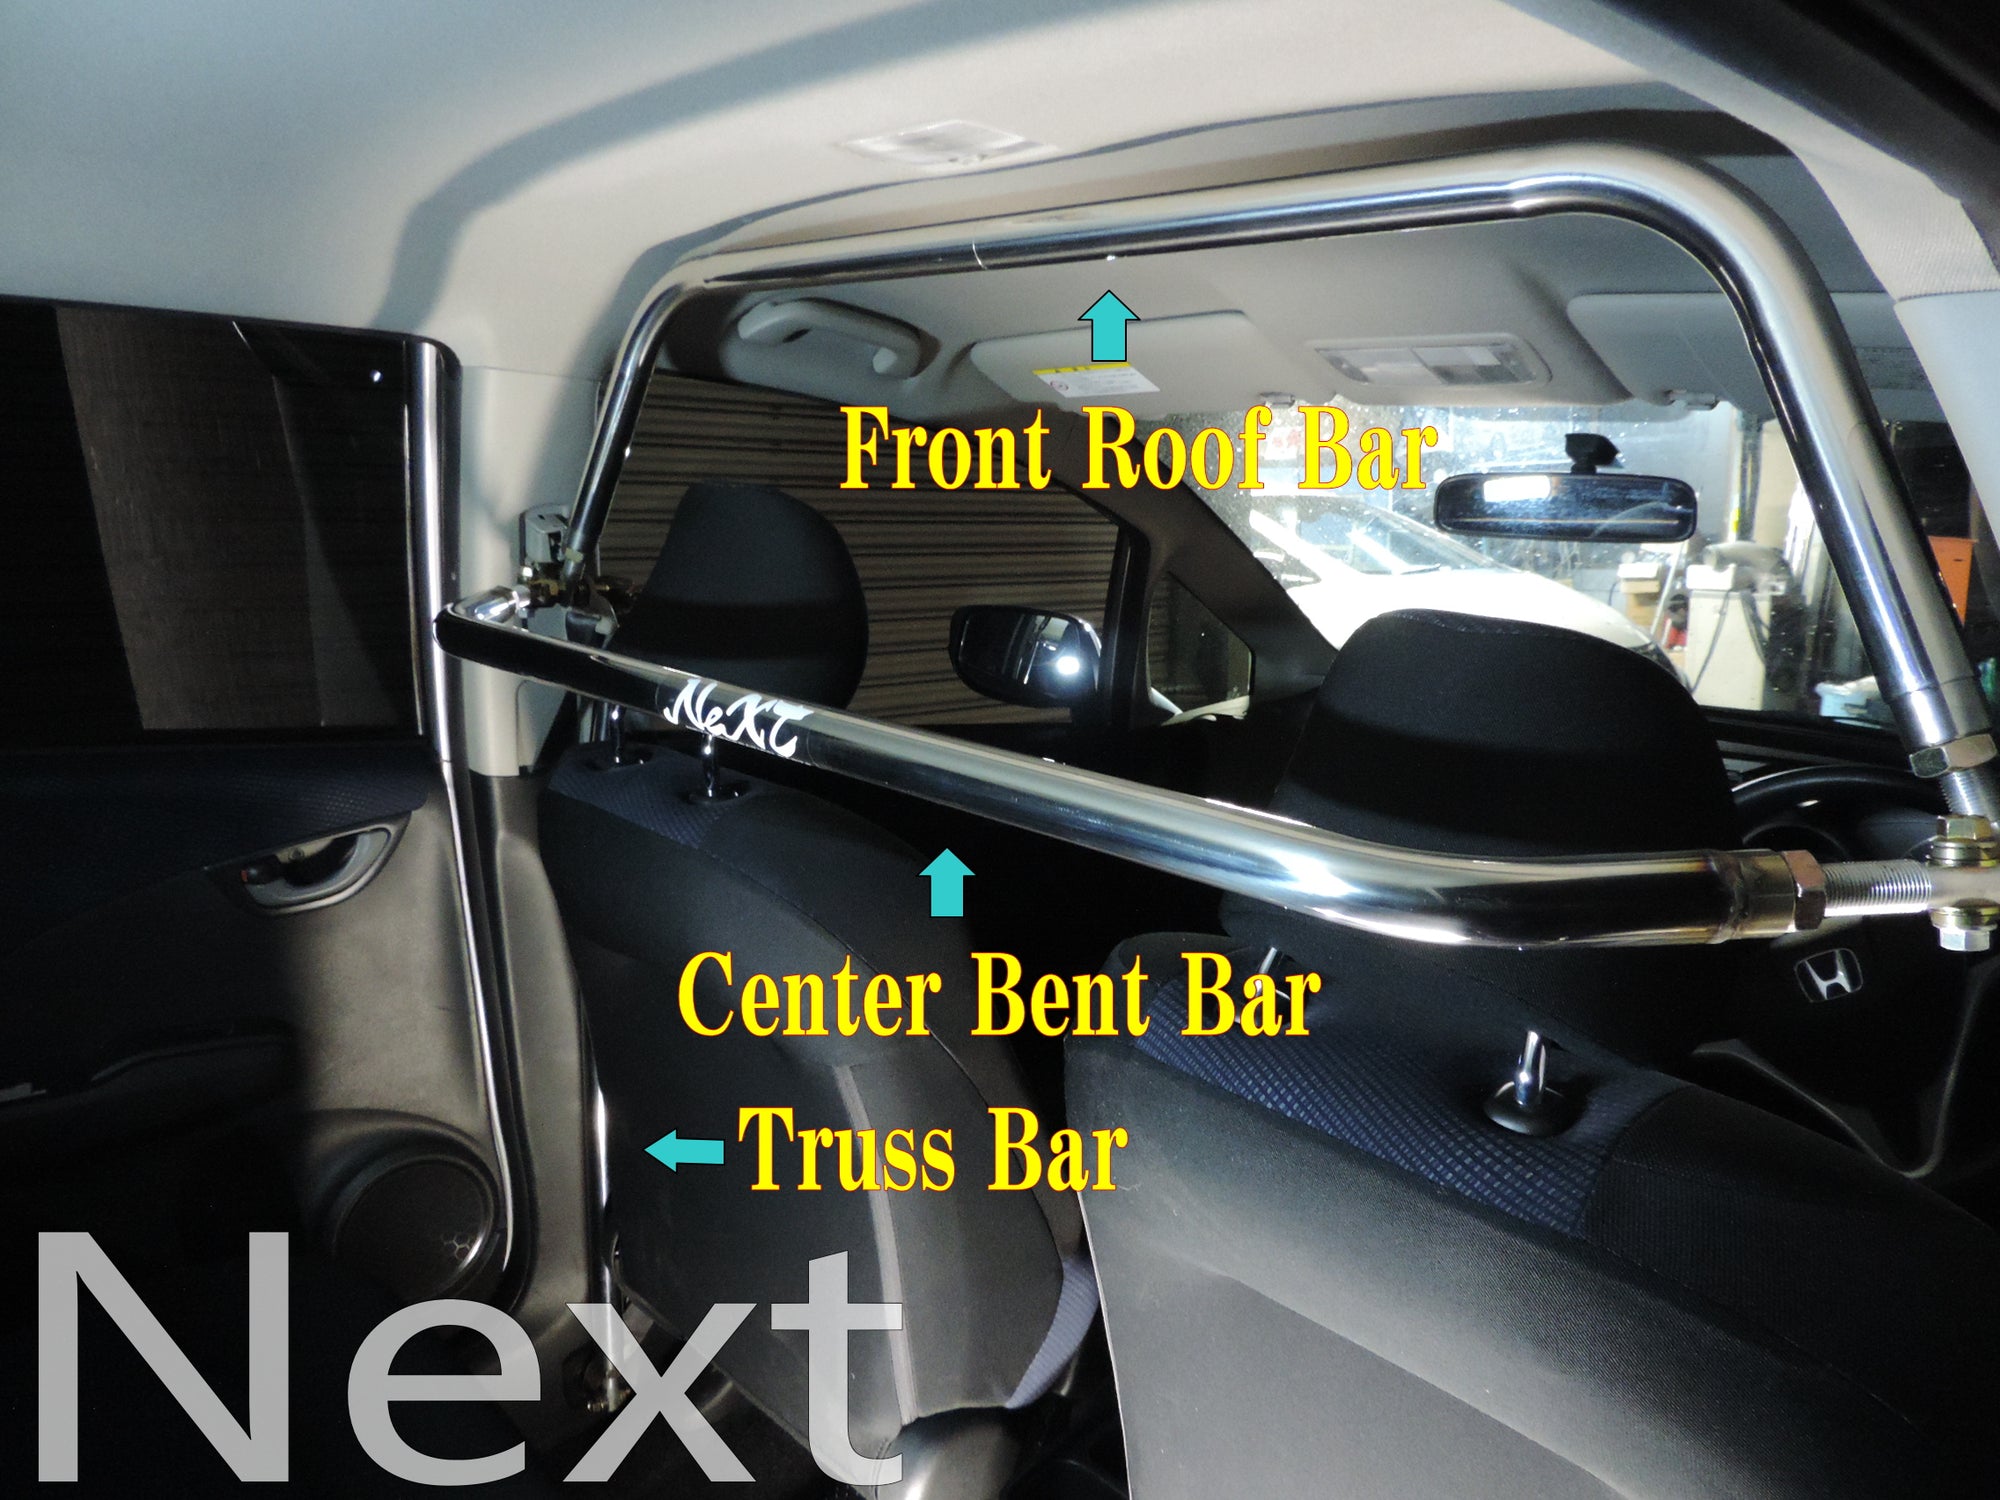 NEXT MIRACLE CROSS BAR FRONT ROOF BAR STAINLESS 35 FOR SUZUKI ALTO HA36 C P NEXT-01419